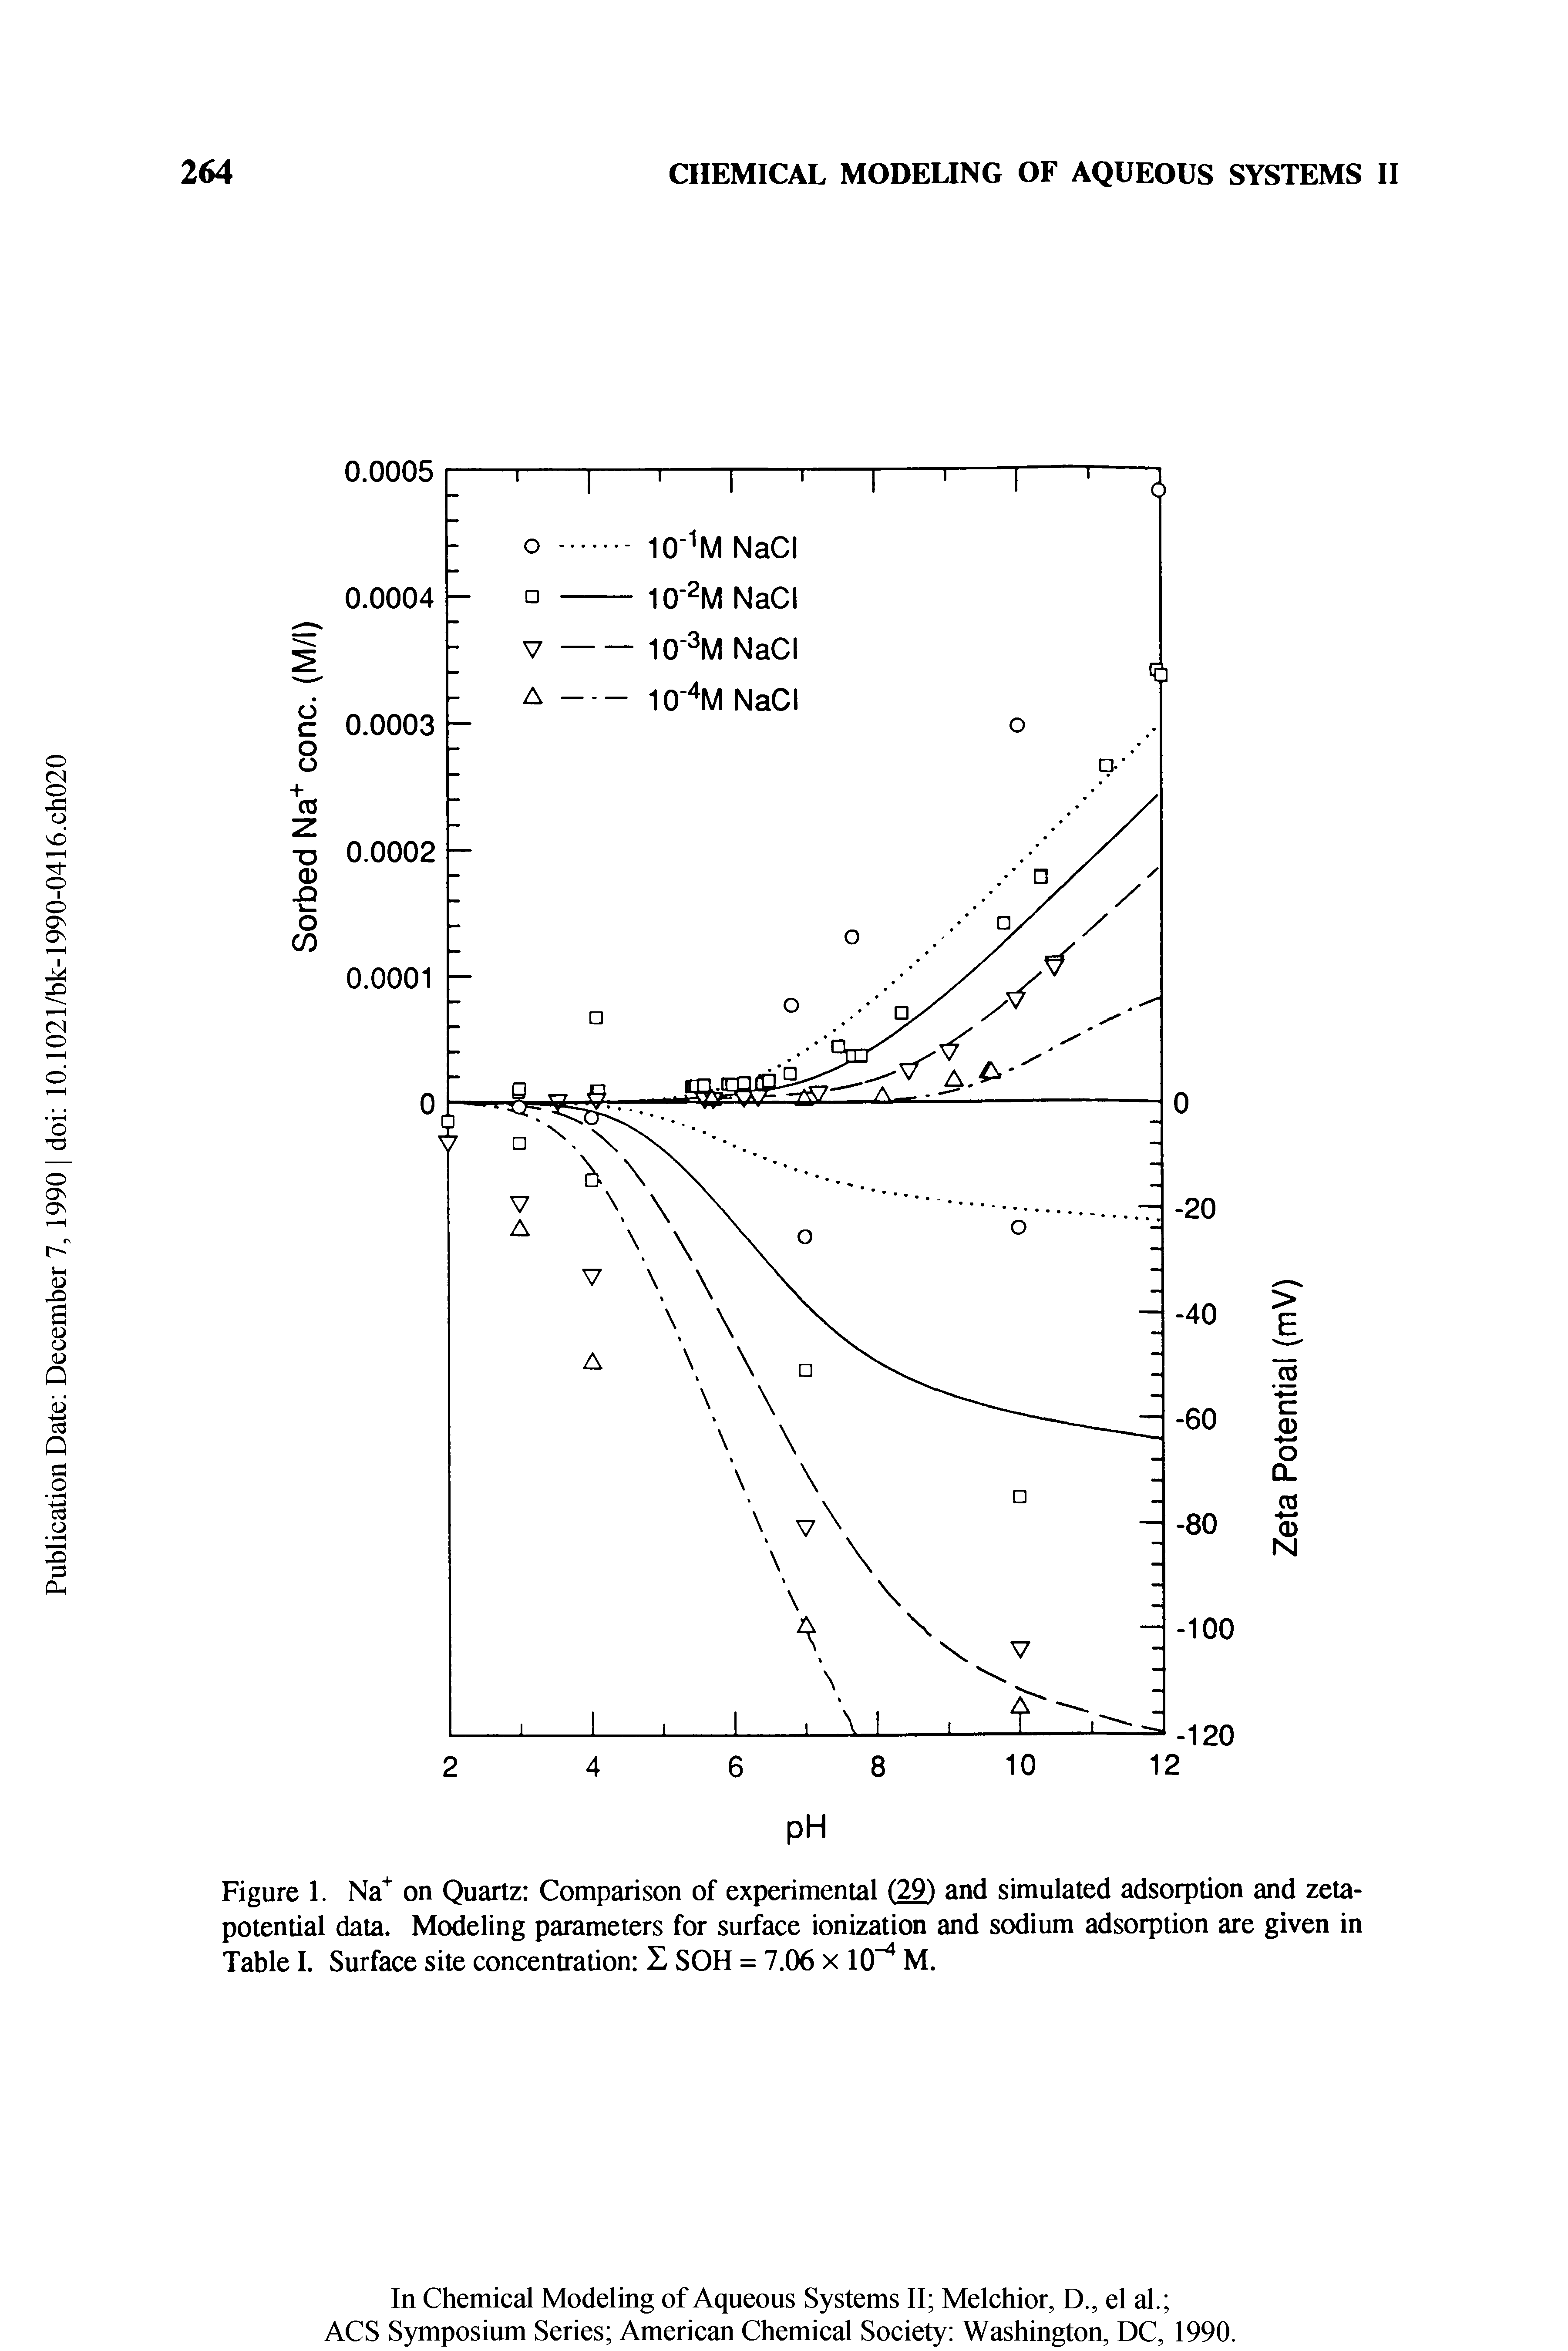 Figure 1. Na on Quartz Comparison of experimental (29) and simulated adsorption and zeta-potential data. Modeling parameters for surface ionization and sodium adsorption are given in Table I. Surface site concentration Z SOH = 7.06 x 10 M.